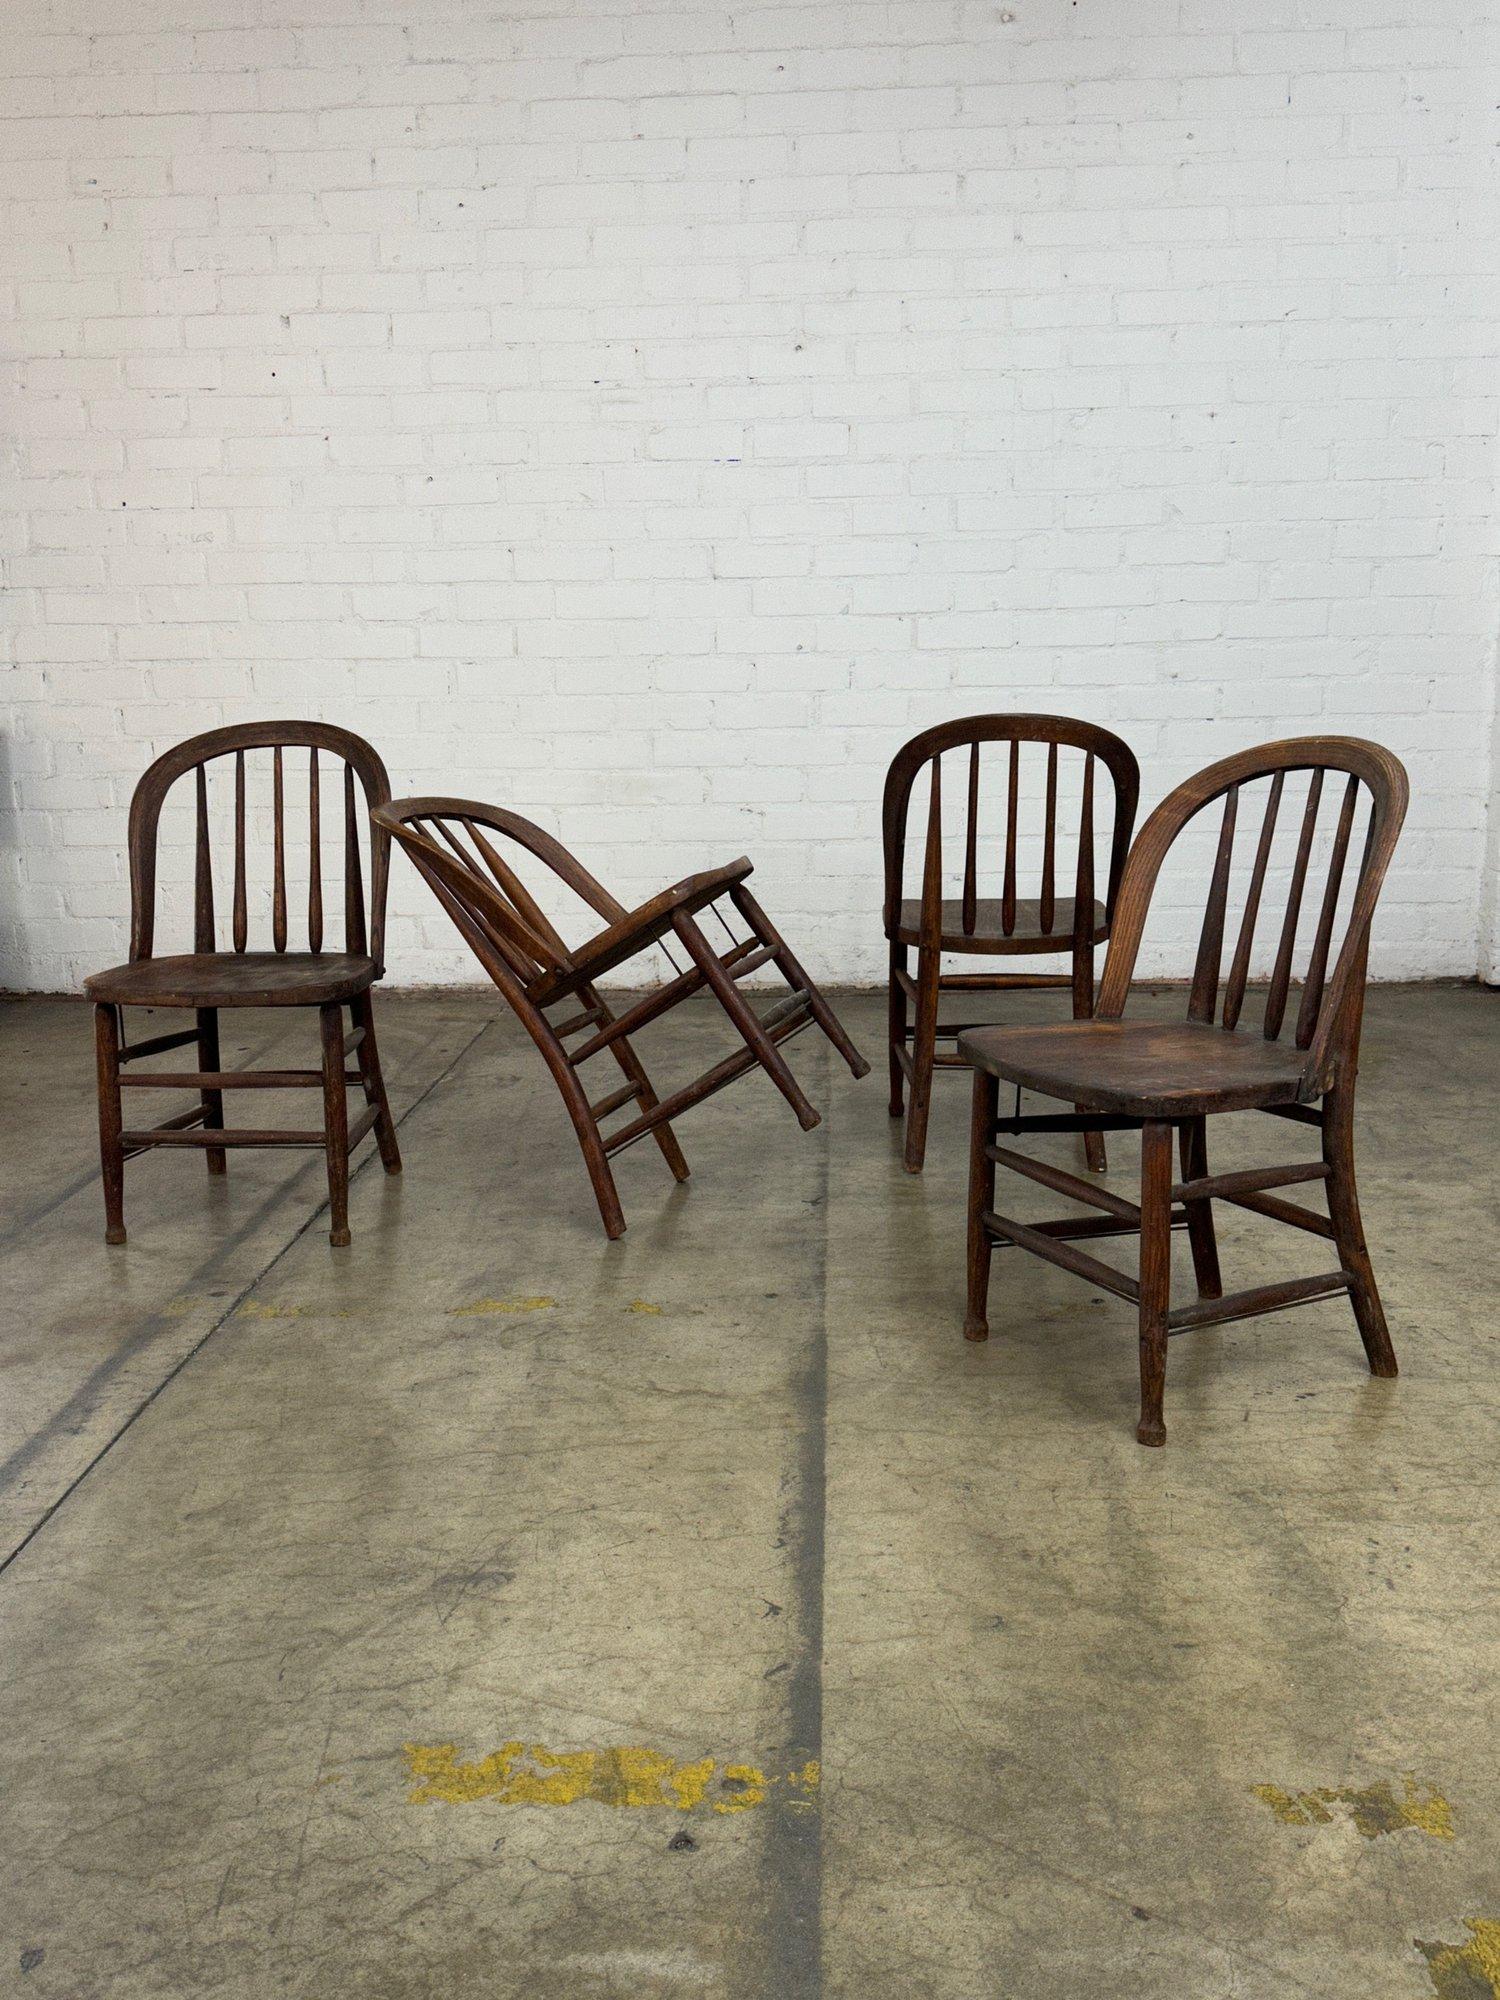 Rustic Vintage Farmhouse Spindle Chairs- Set of 4 For Sale